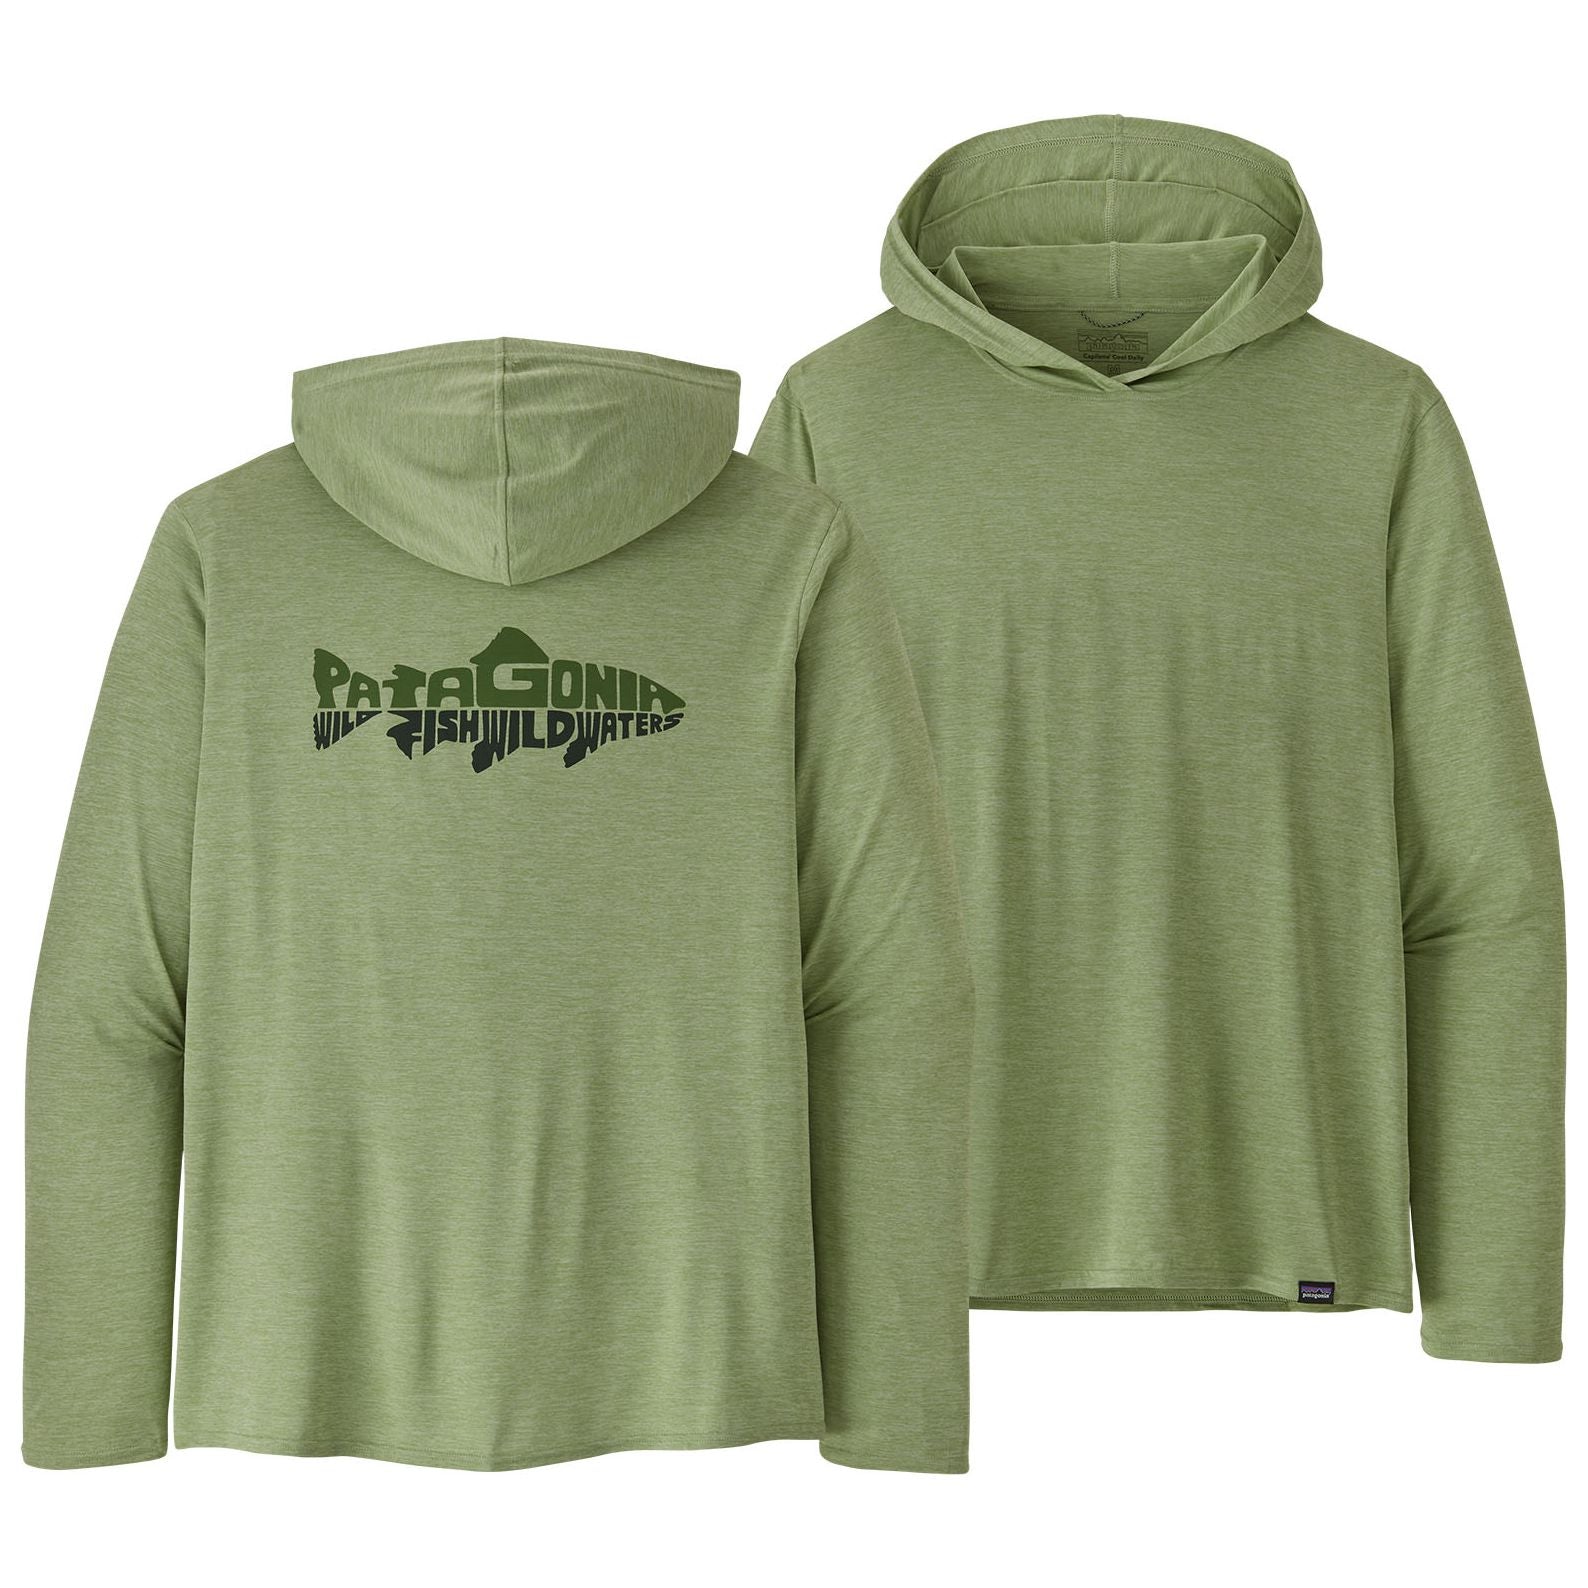 Patagonia Capilene Cool Daily Graphic Hoody - Relaxed Fit Wild Waterline: Salvia Green X-Dye Image 01